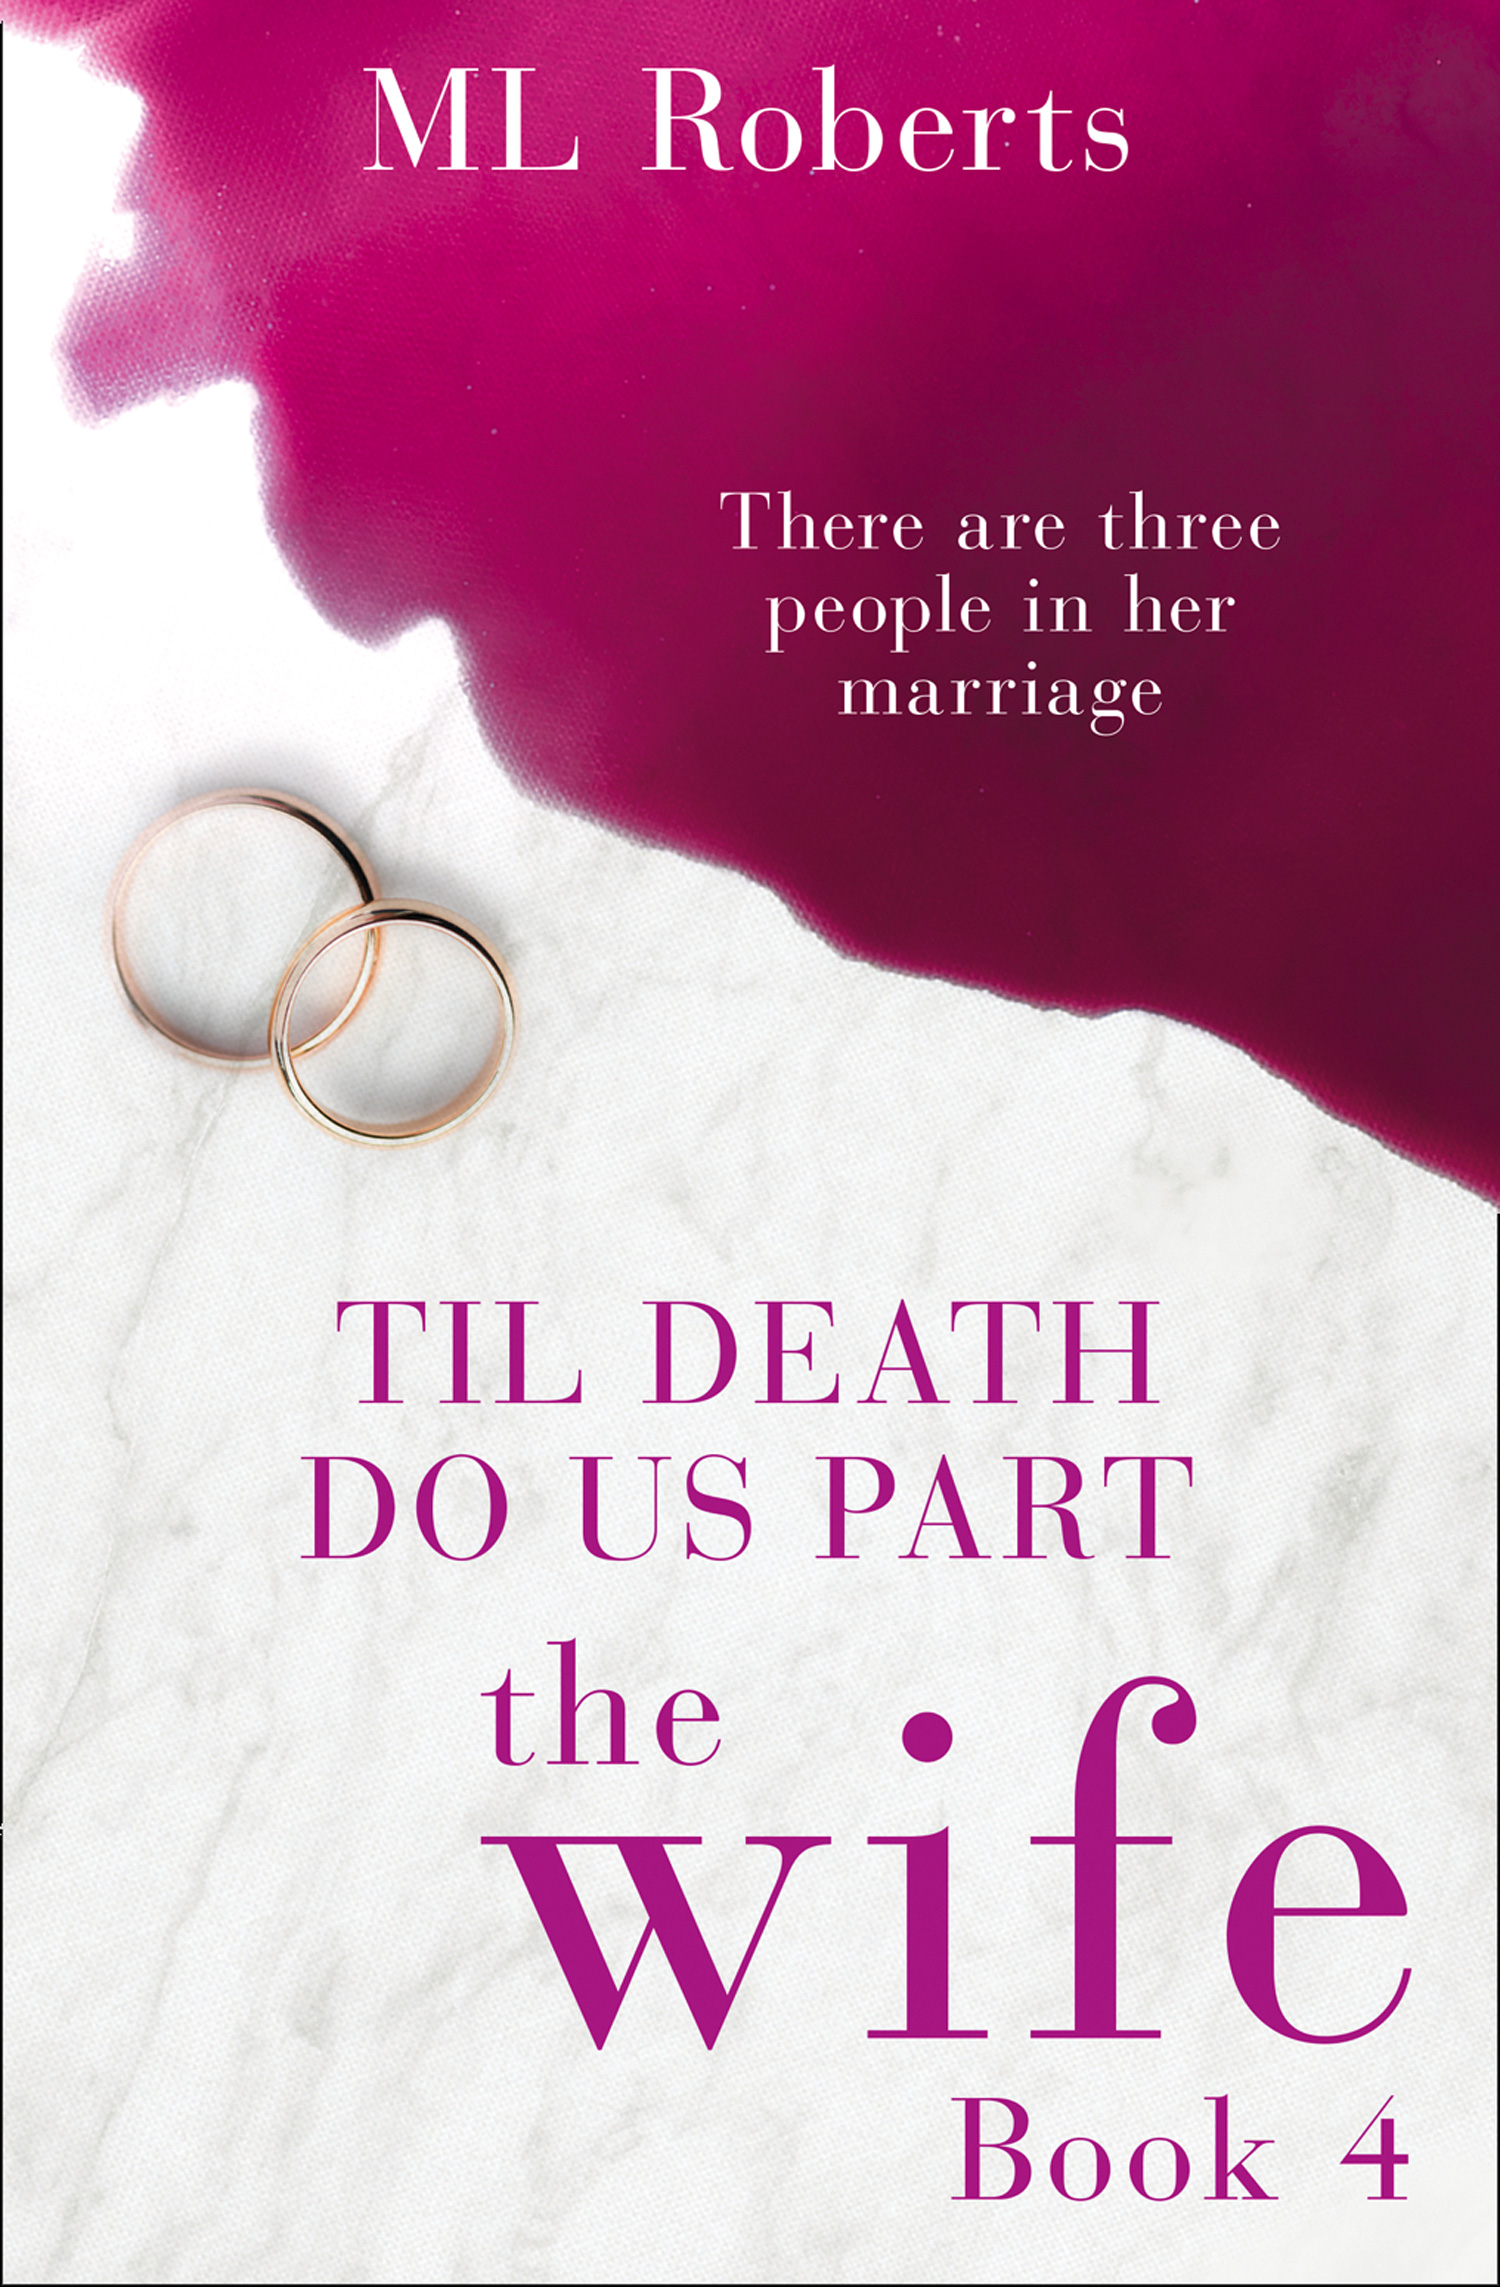 The wife book. Till Death do us Part.